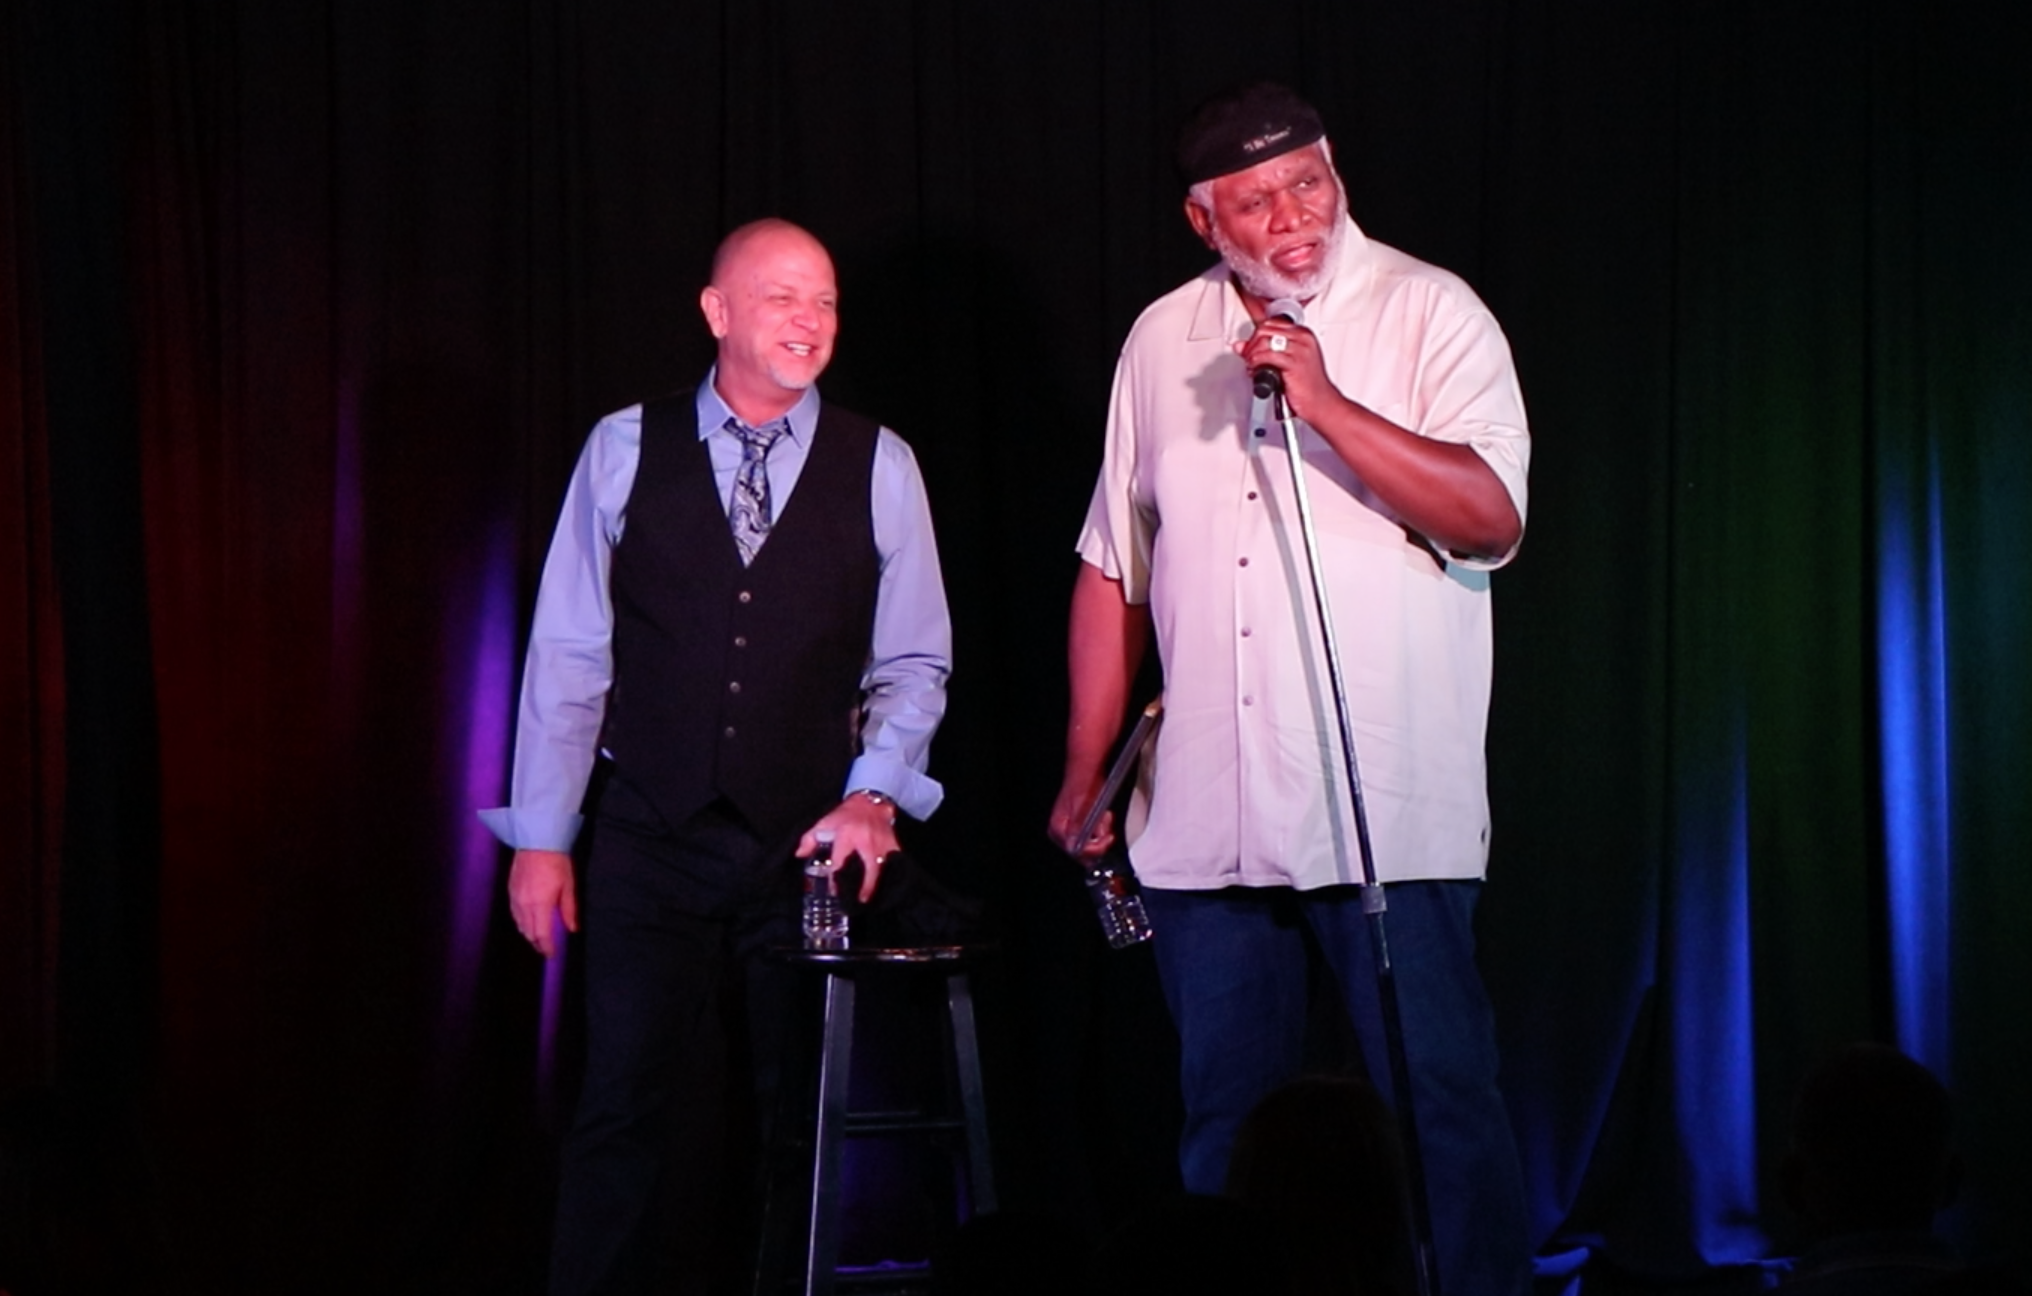 Comedy Legend George Wallace joins resident headliner Don Barnhart onstage for some improvisational riffing.